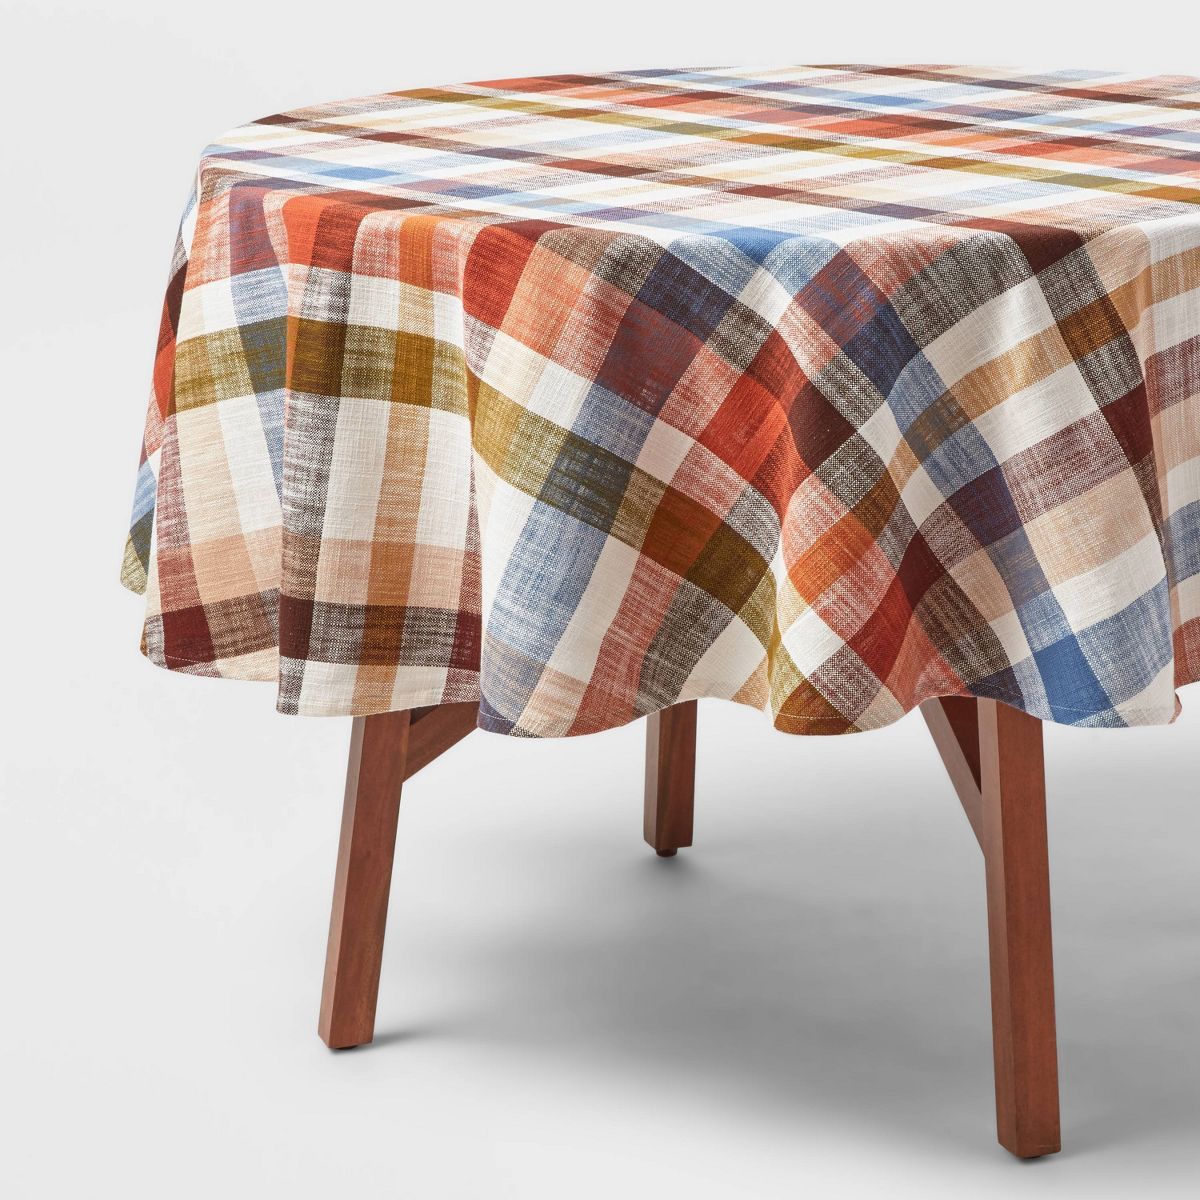 Plaid Woven Cotton Tablecloth - Threshold™ | Target